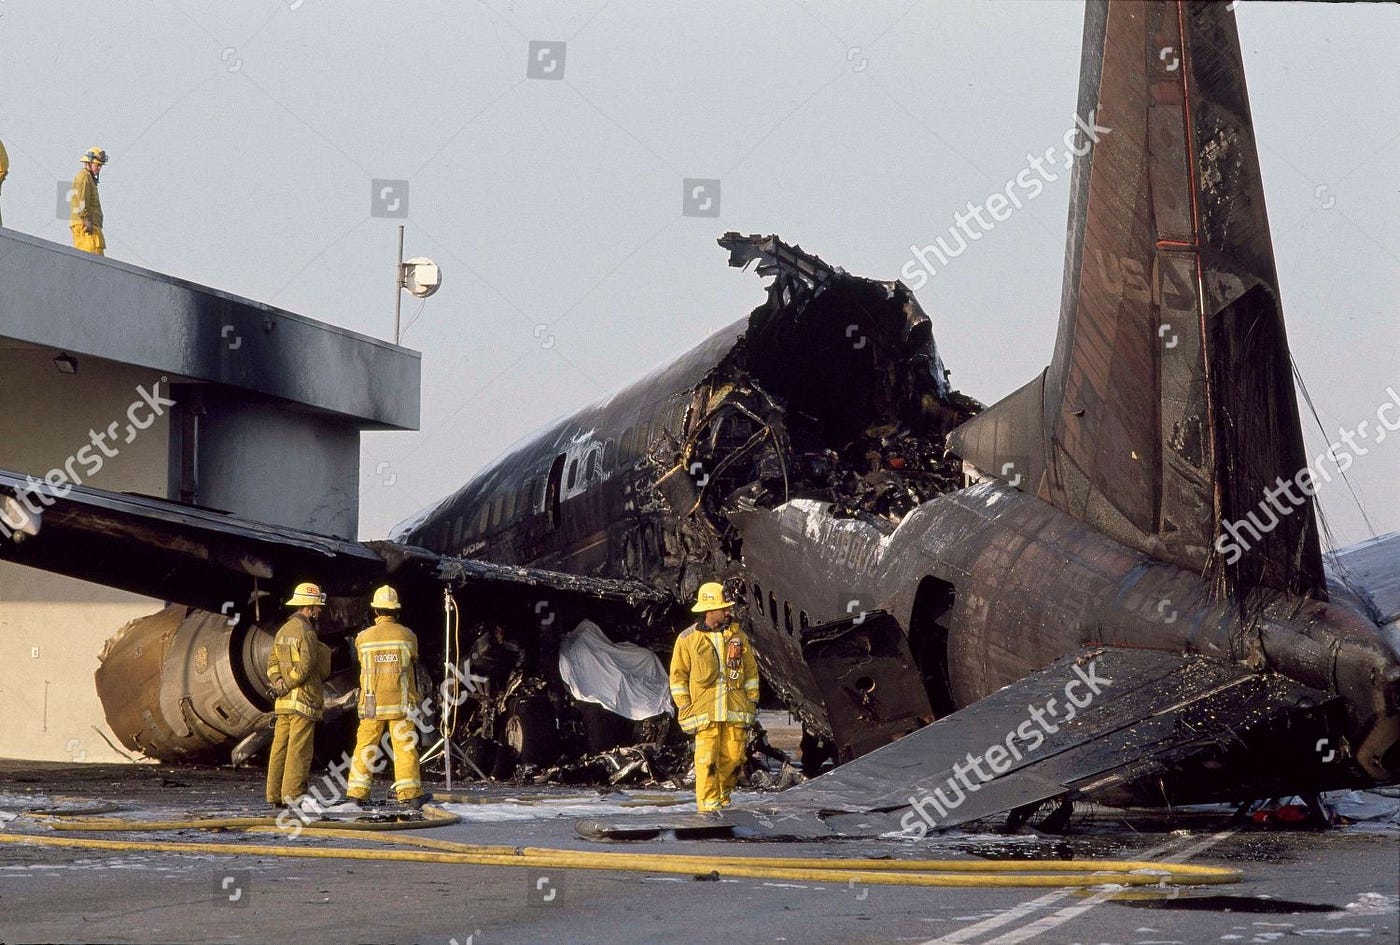 Cleared to Collide: The crash of USAir flight 1493 and SkyWest flight 5569,  or the Los Angeles Runway Disaster | by Admiral Cloudberg | Medium